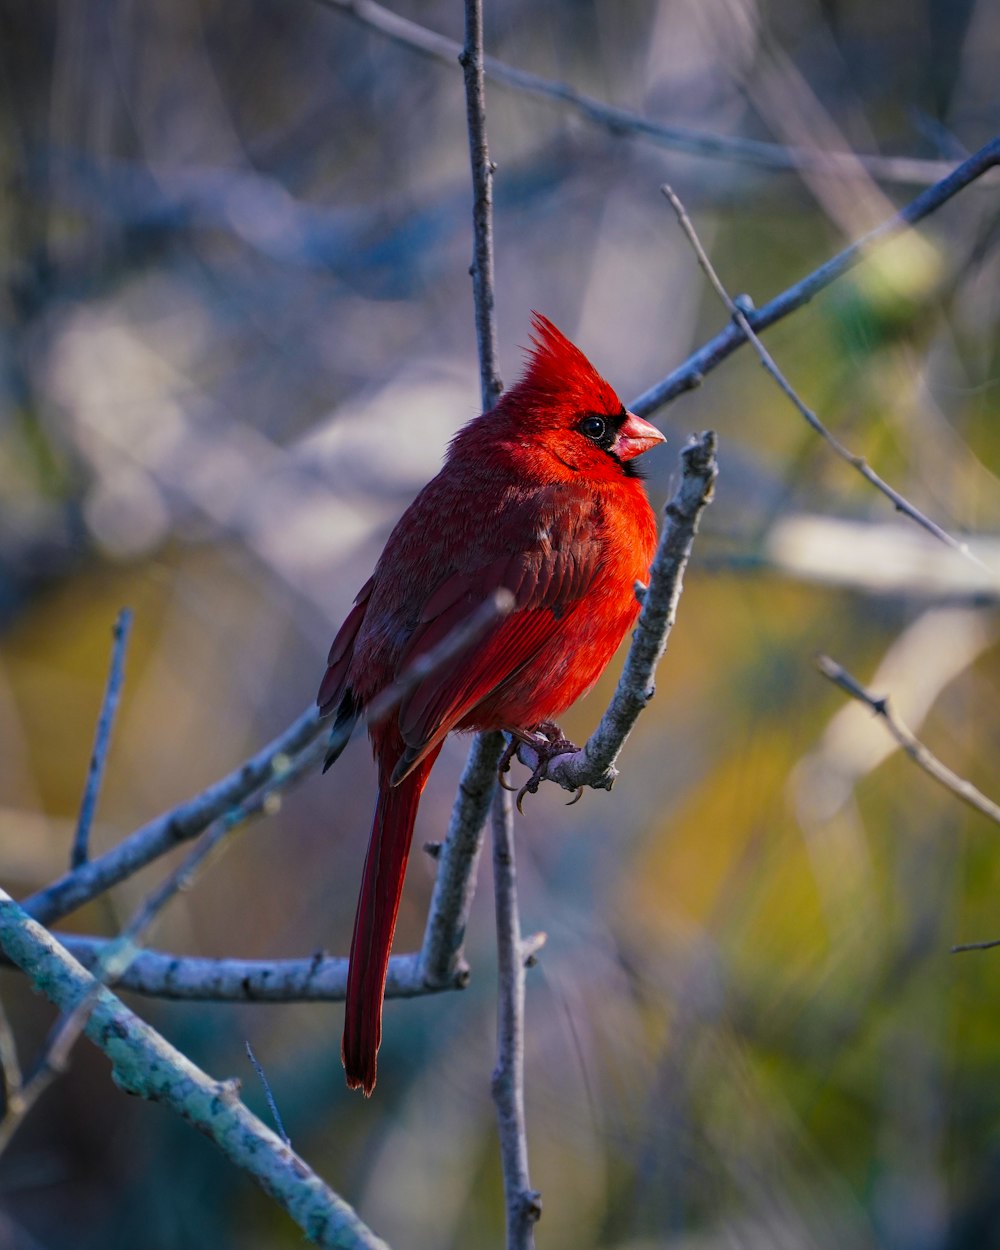 red cardinal bird on gray metal wire during daytime